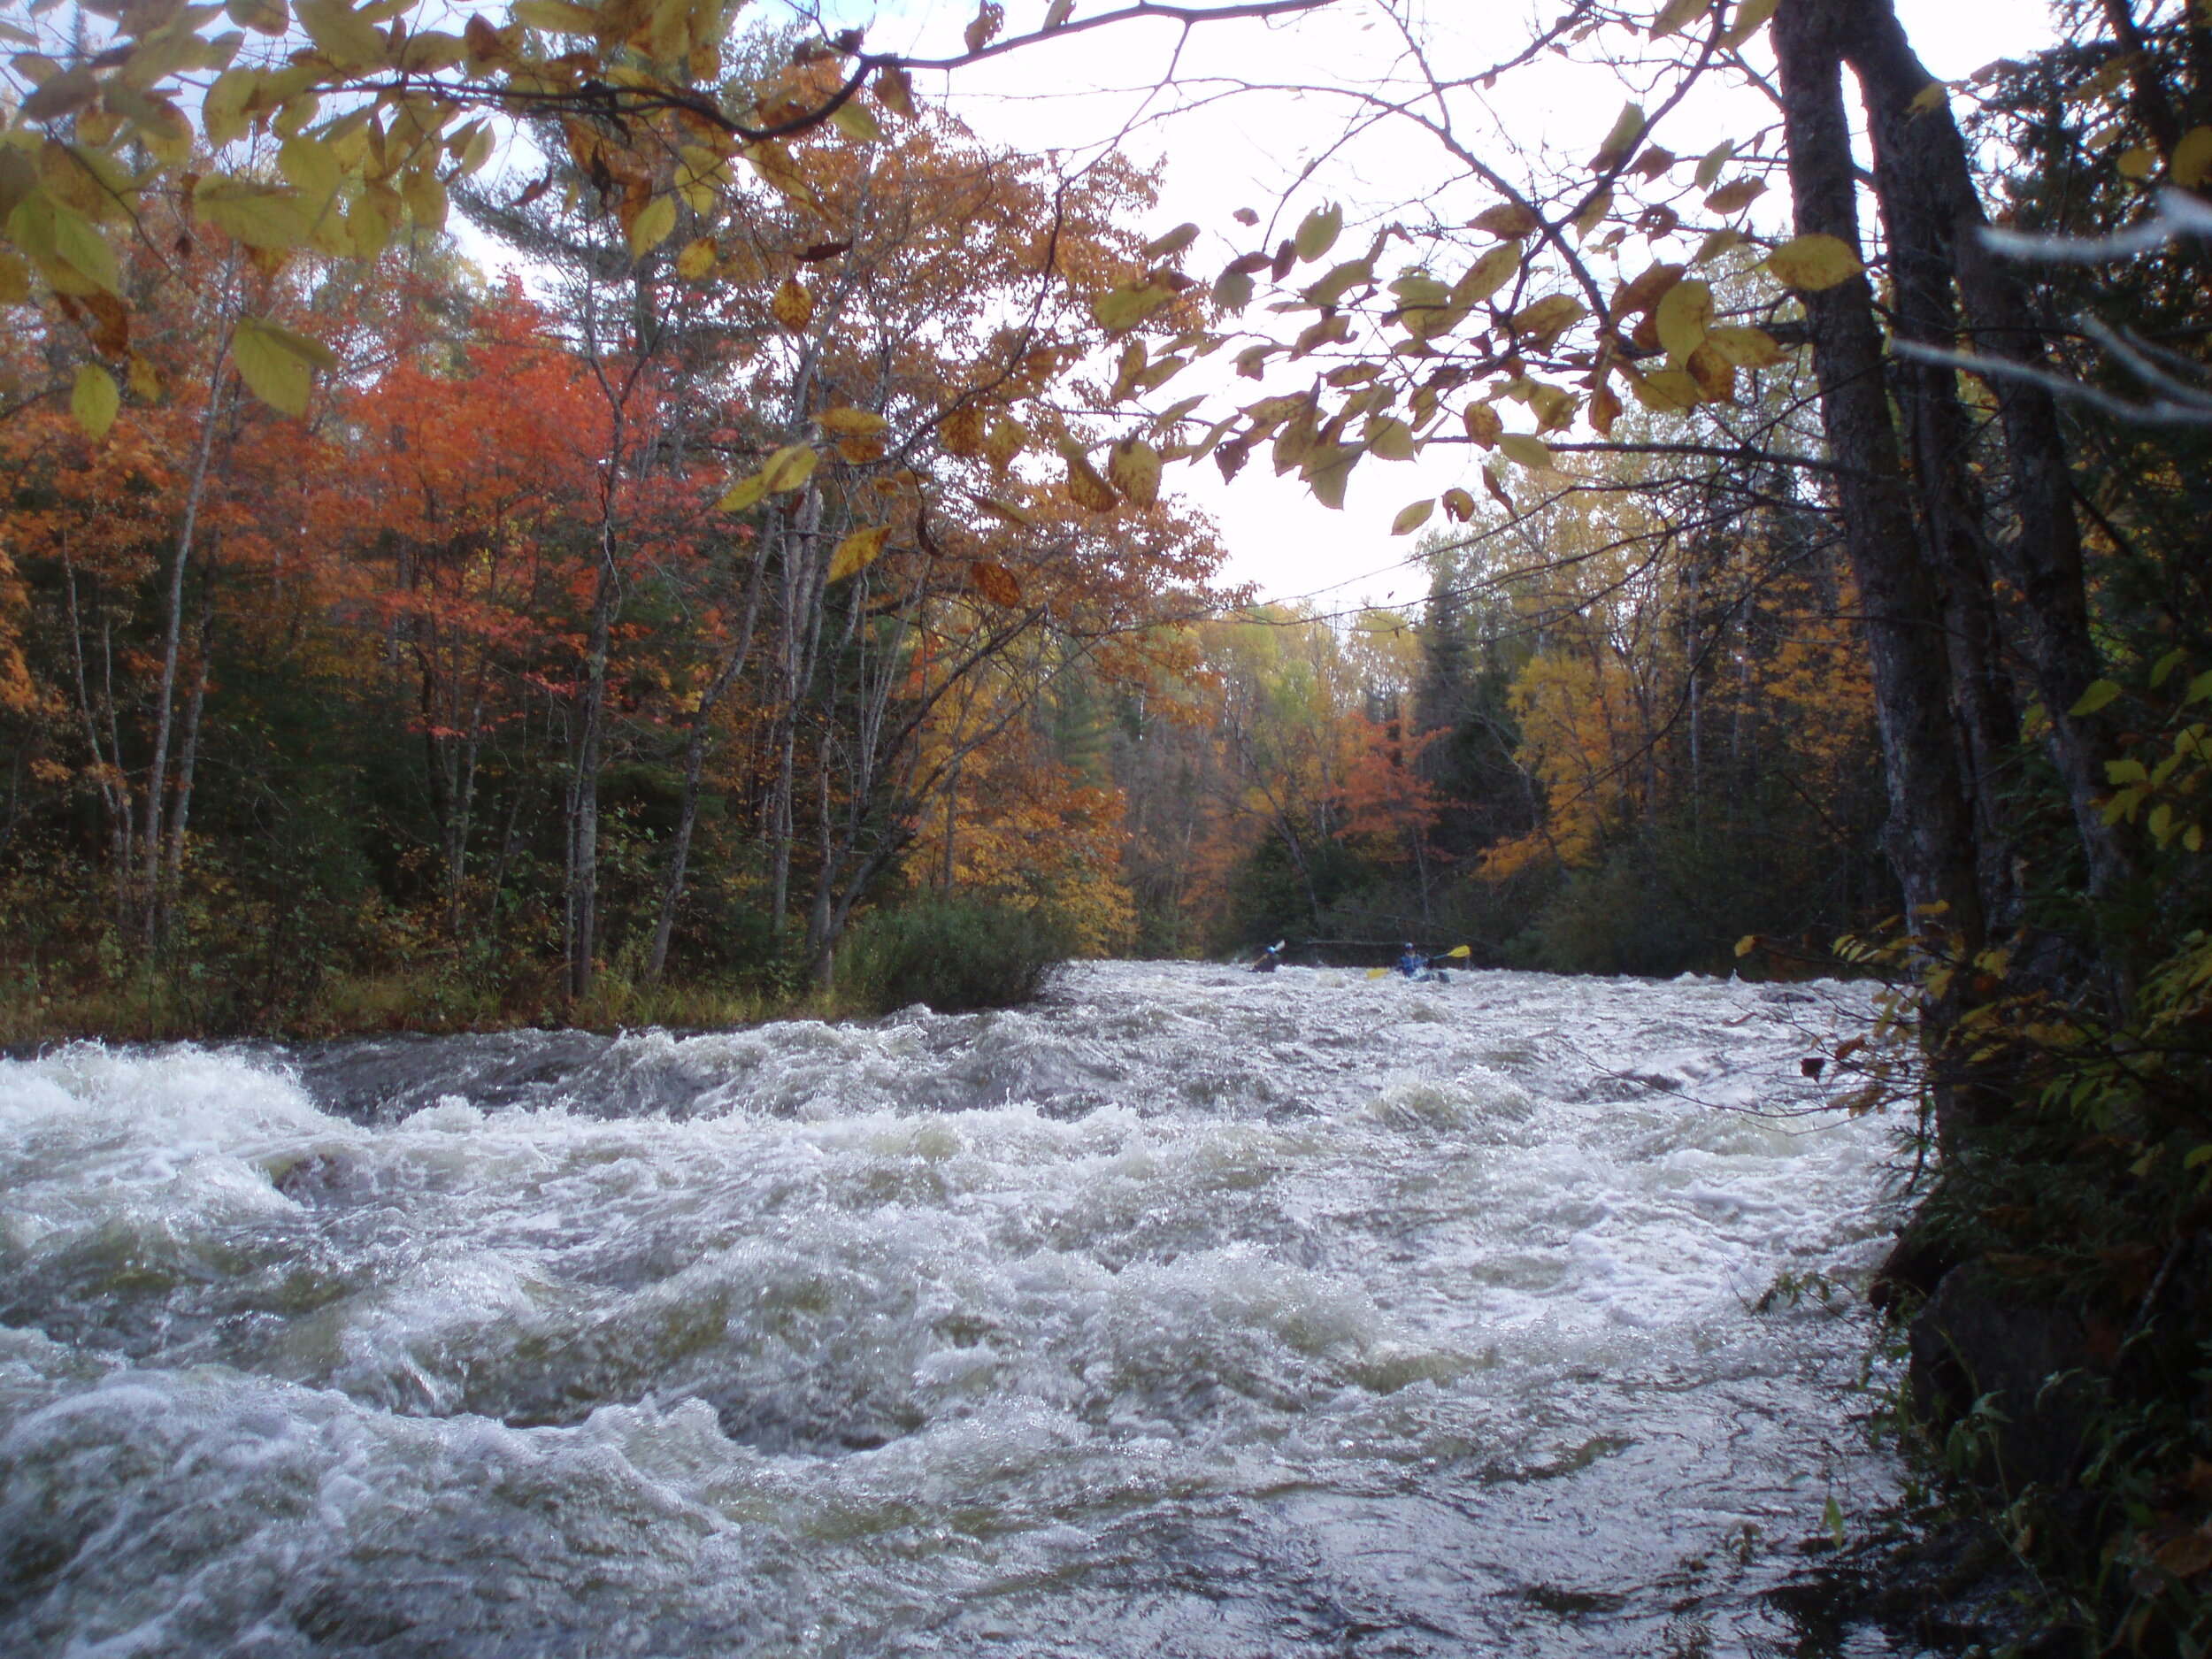  In  the falls of 2007-2010, a small group of PIF and NWA members would gather and paddle some of the Wild and Scenic rivers in the Ottawa. The West Branch below Lake Gogebic and the Cisco branch below the inlet with the Tenderfoot Creek and through 